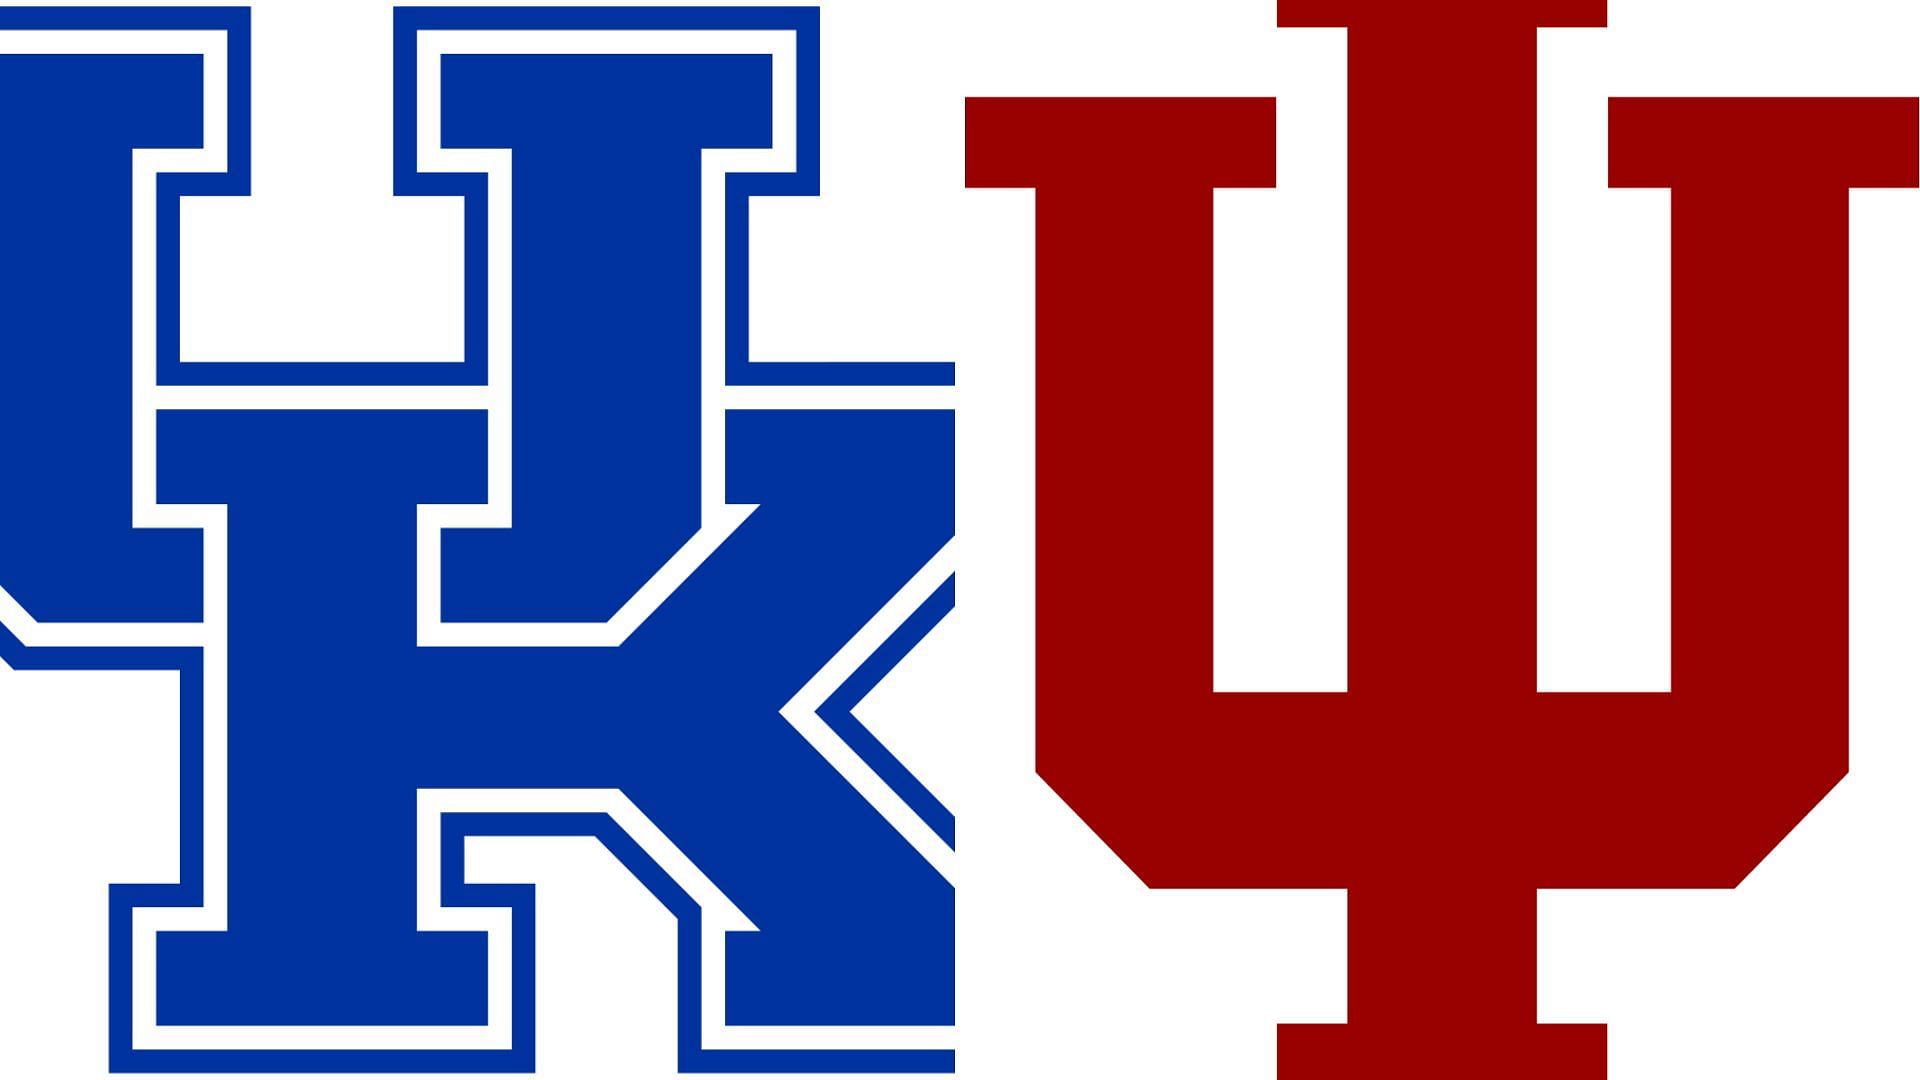 Kentucky vs Indiana in the 2023 NCAA Baseball Tournament is going to be interesting